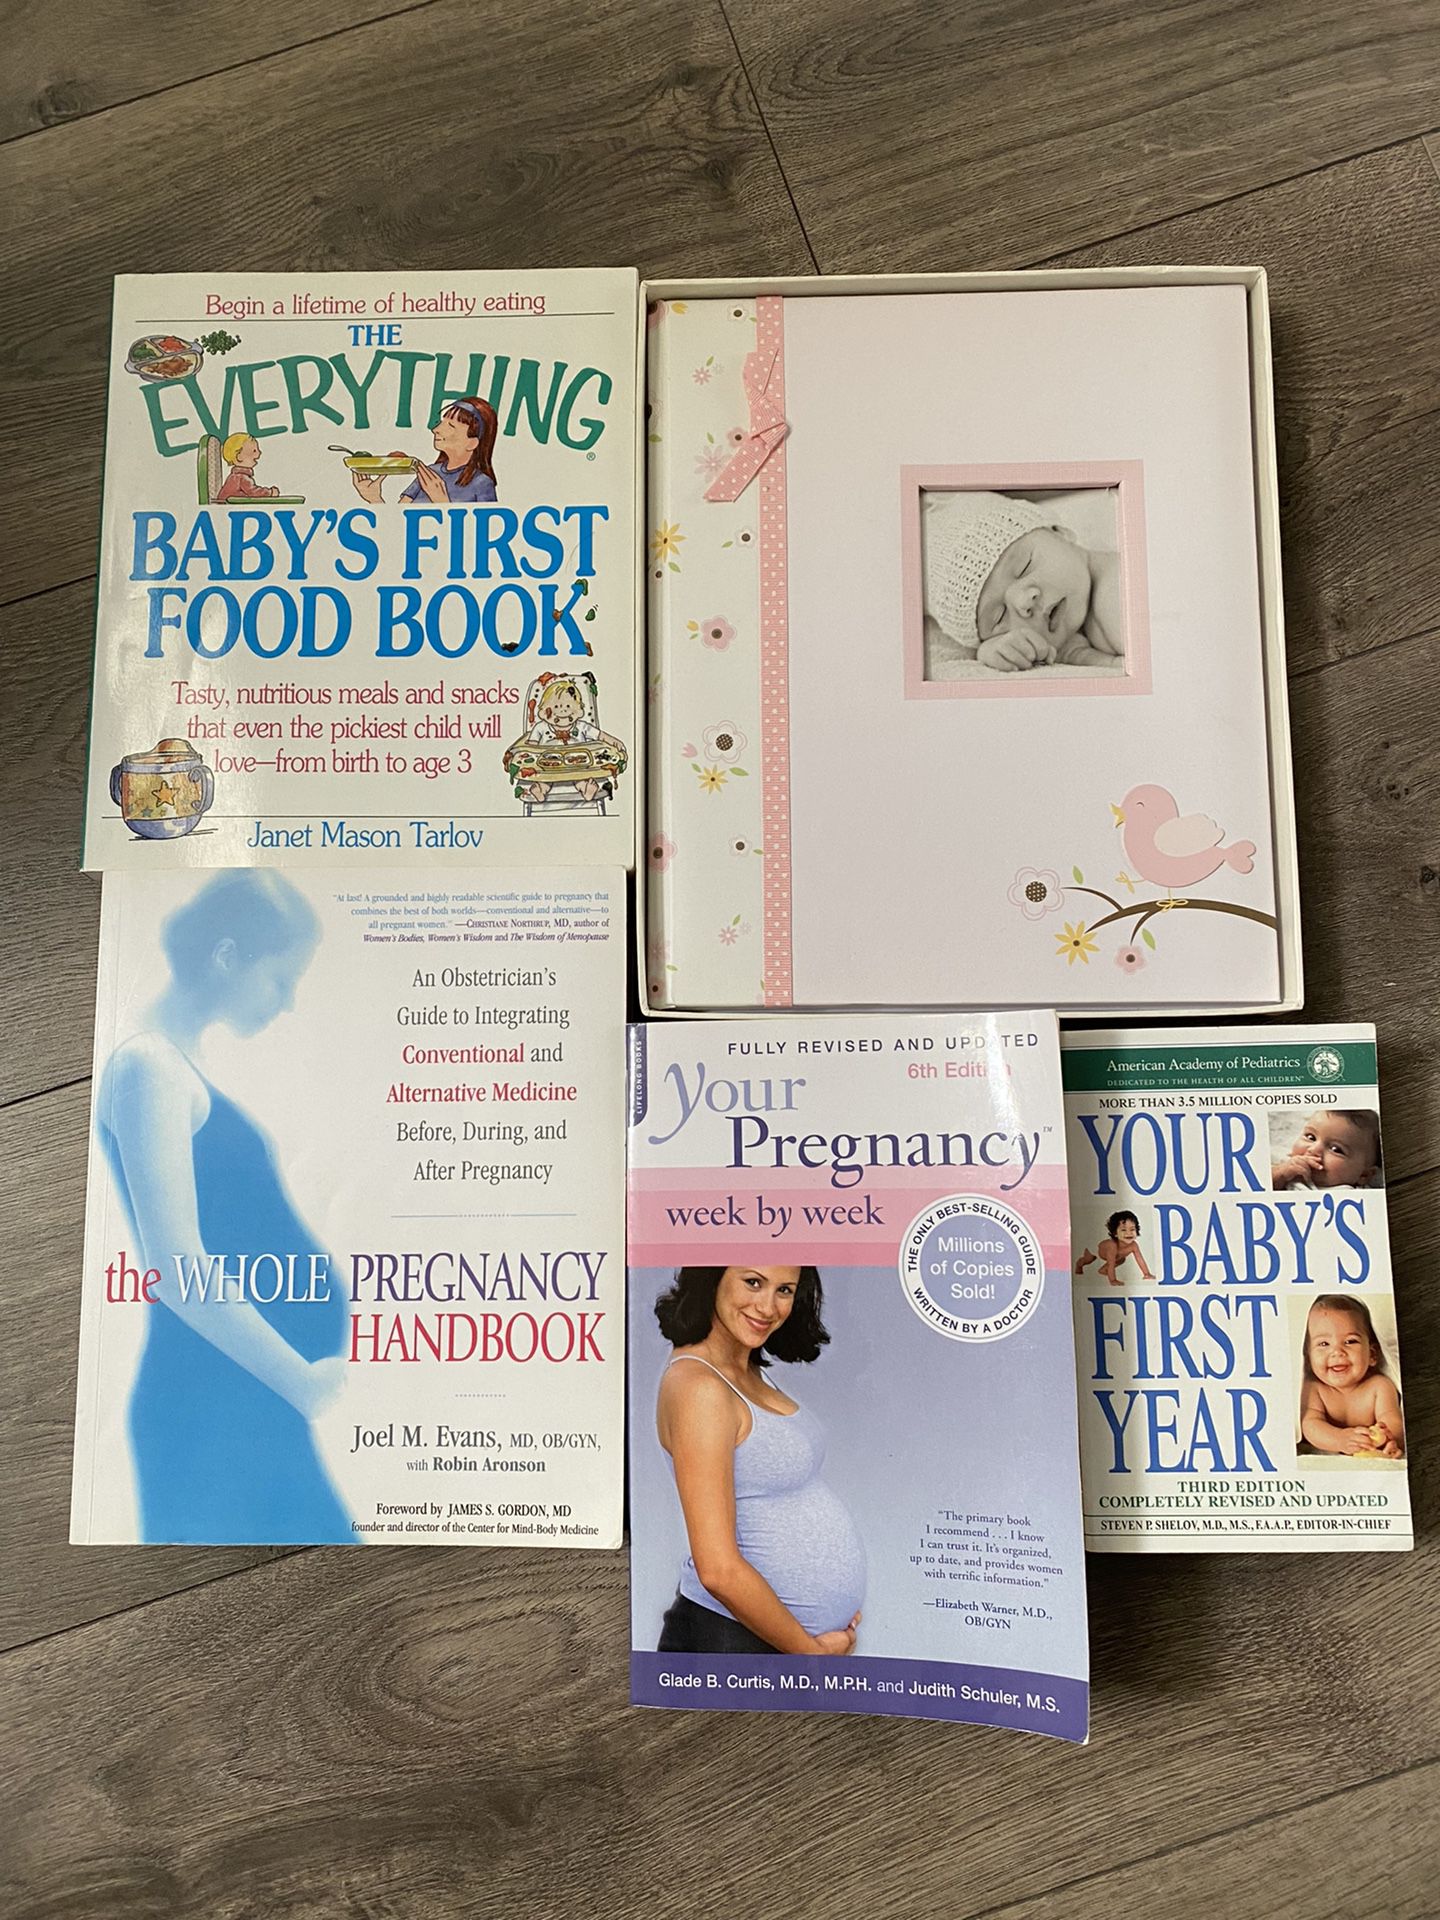 Pregnancy and baby’s first year books plus Photo album